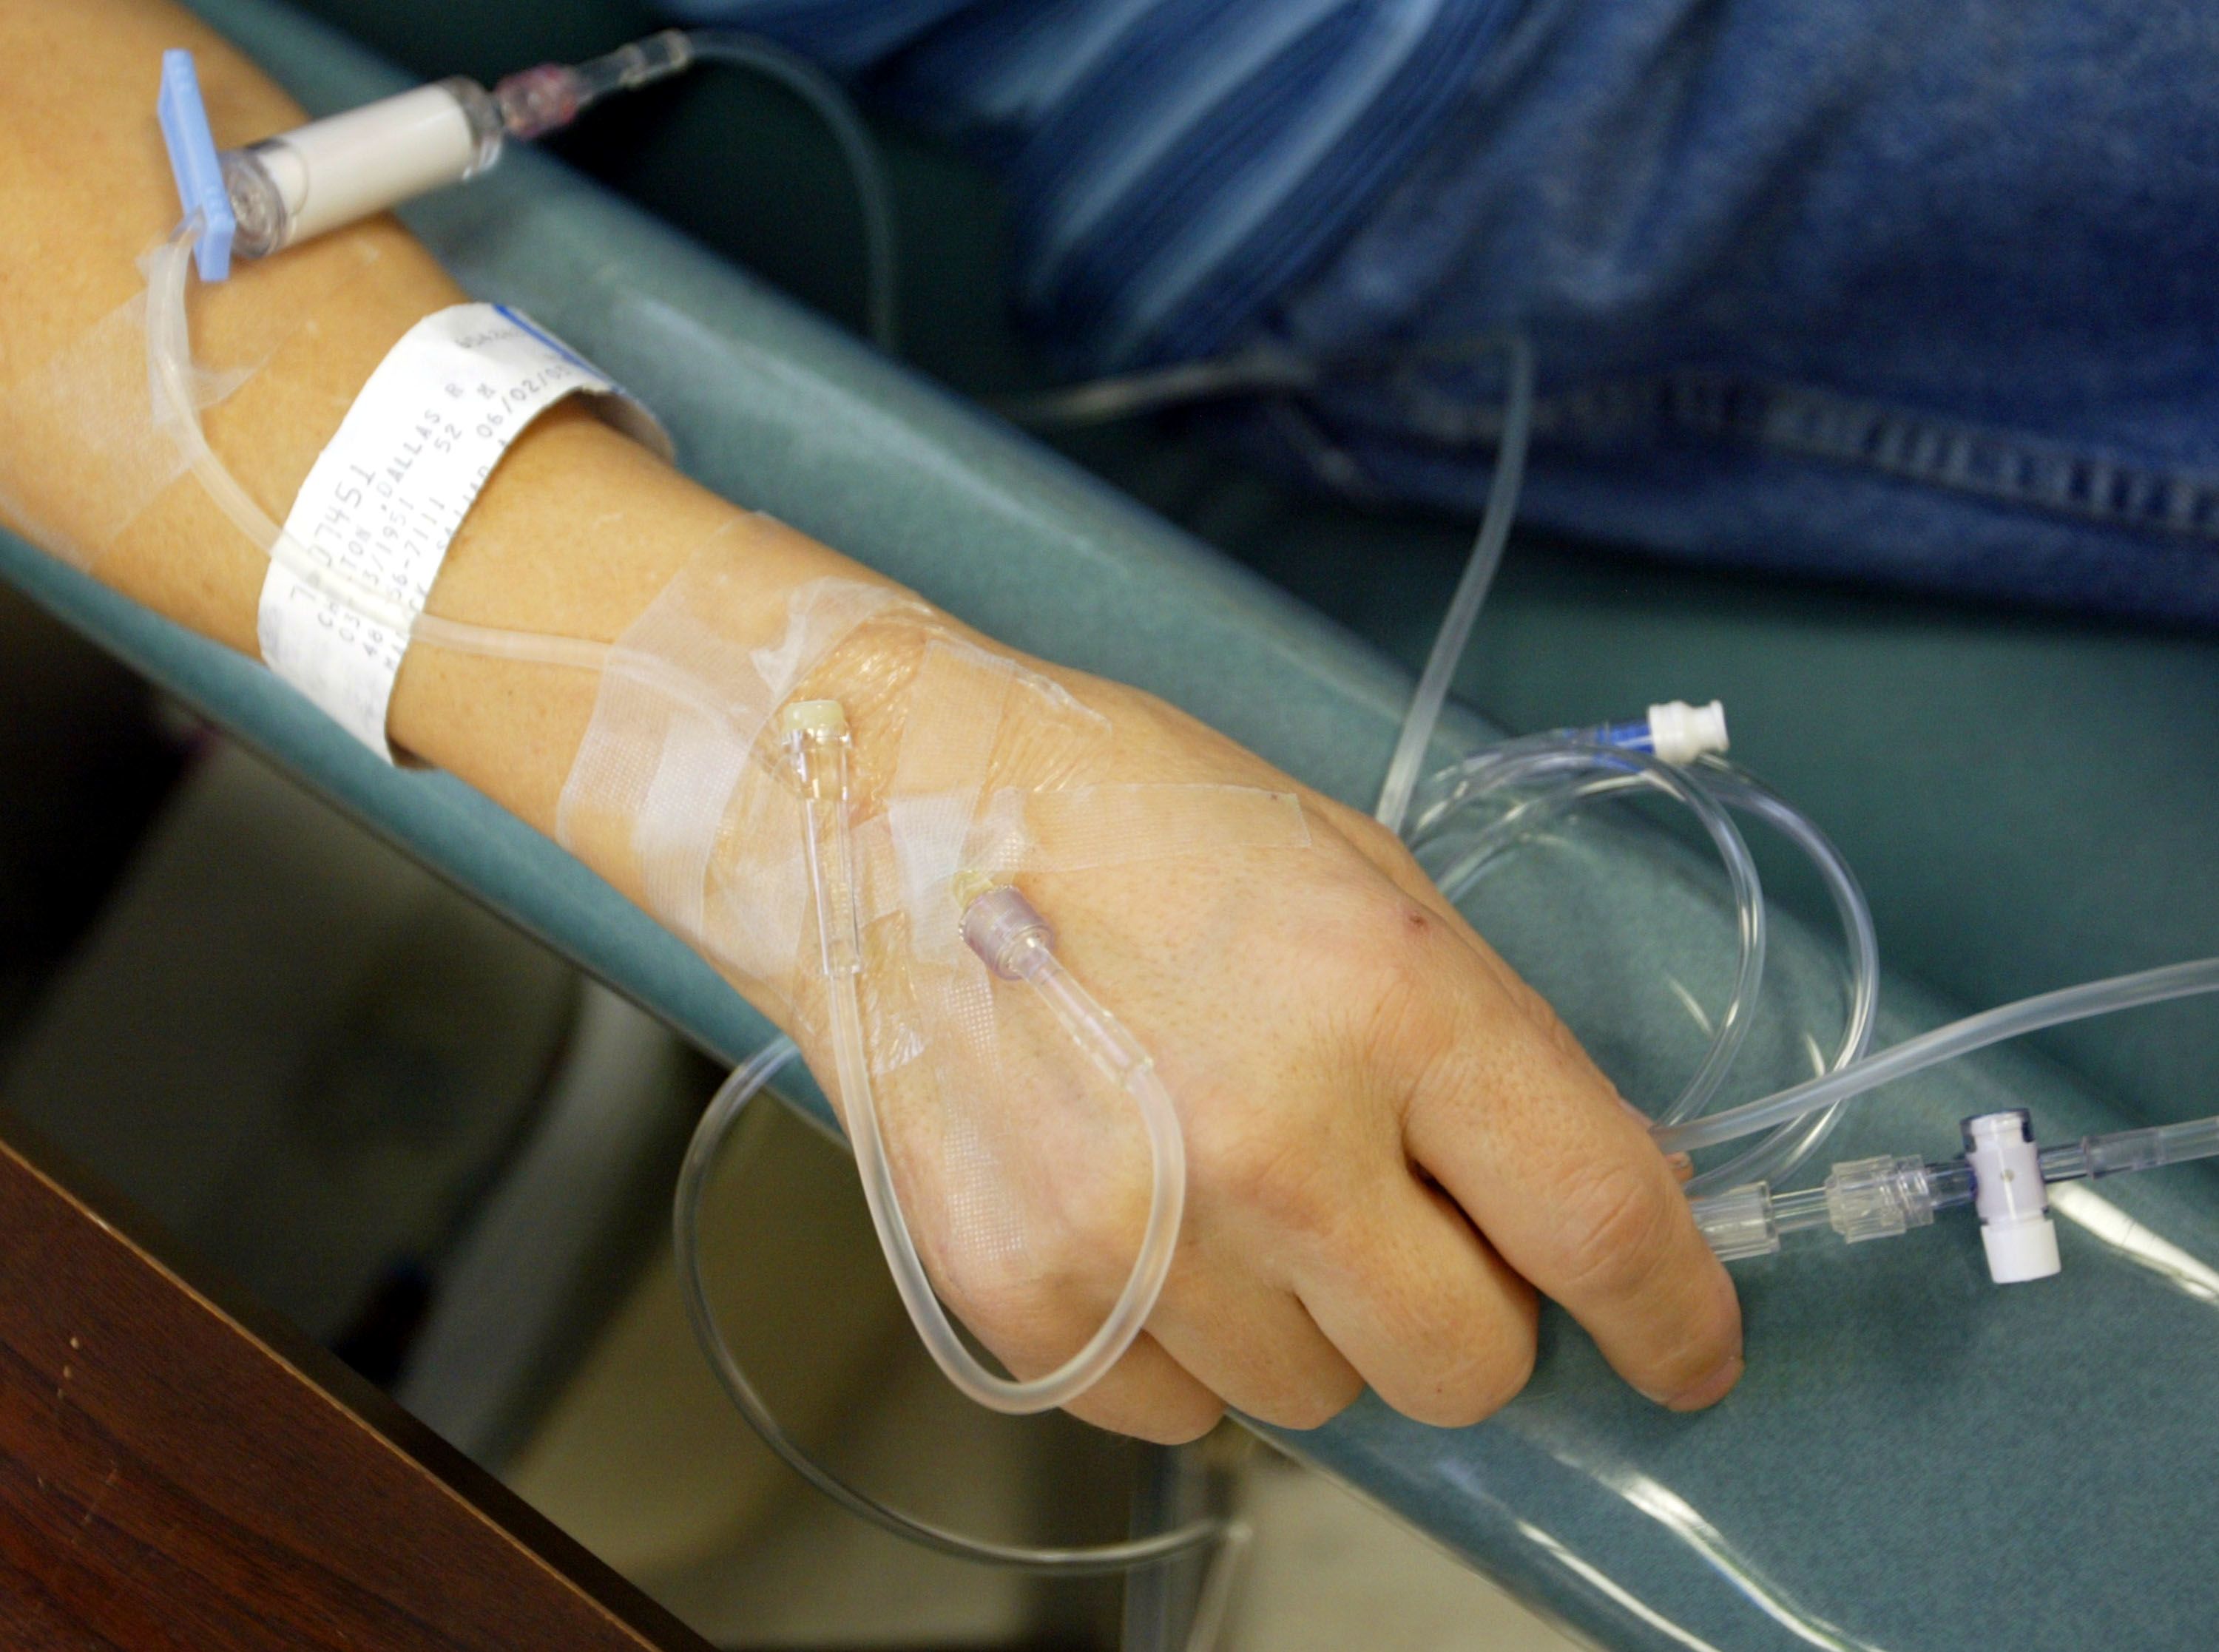 US cancer centers still see 'widespread' shortages of life-saving chemo  drugs, survey finds